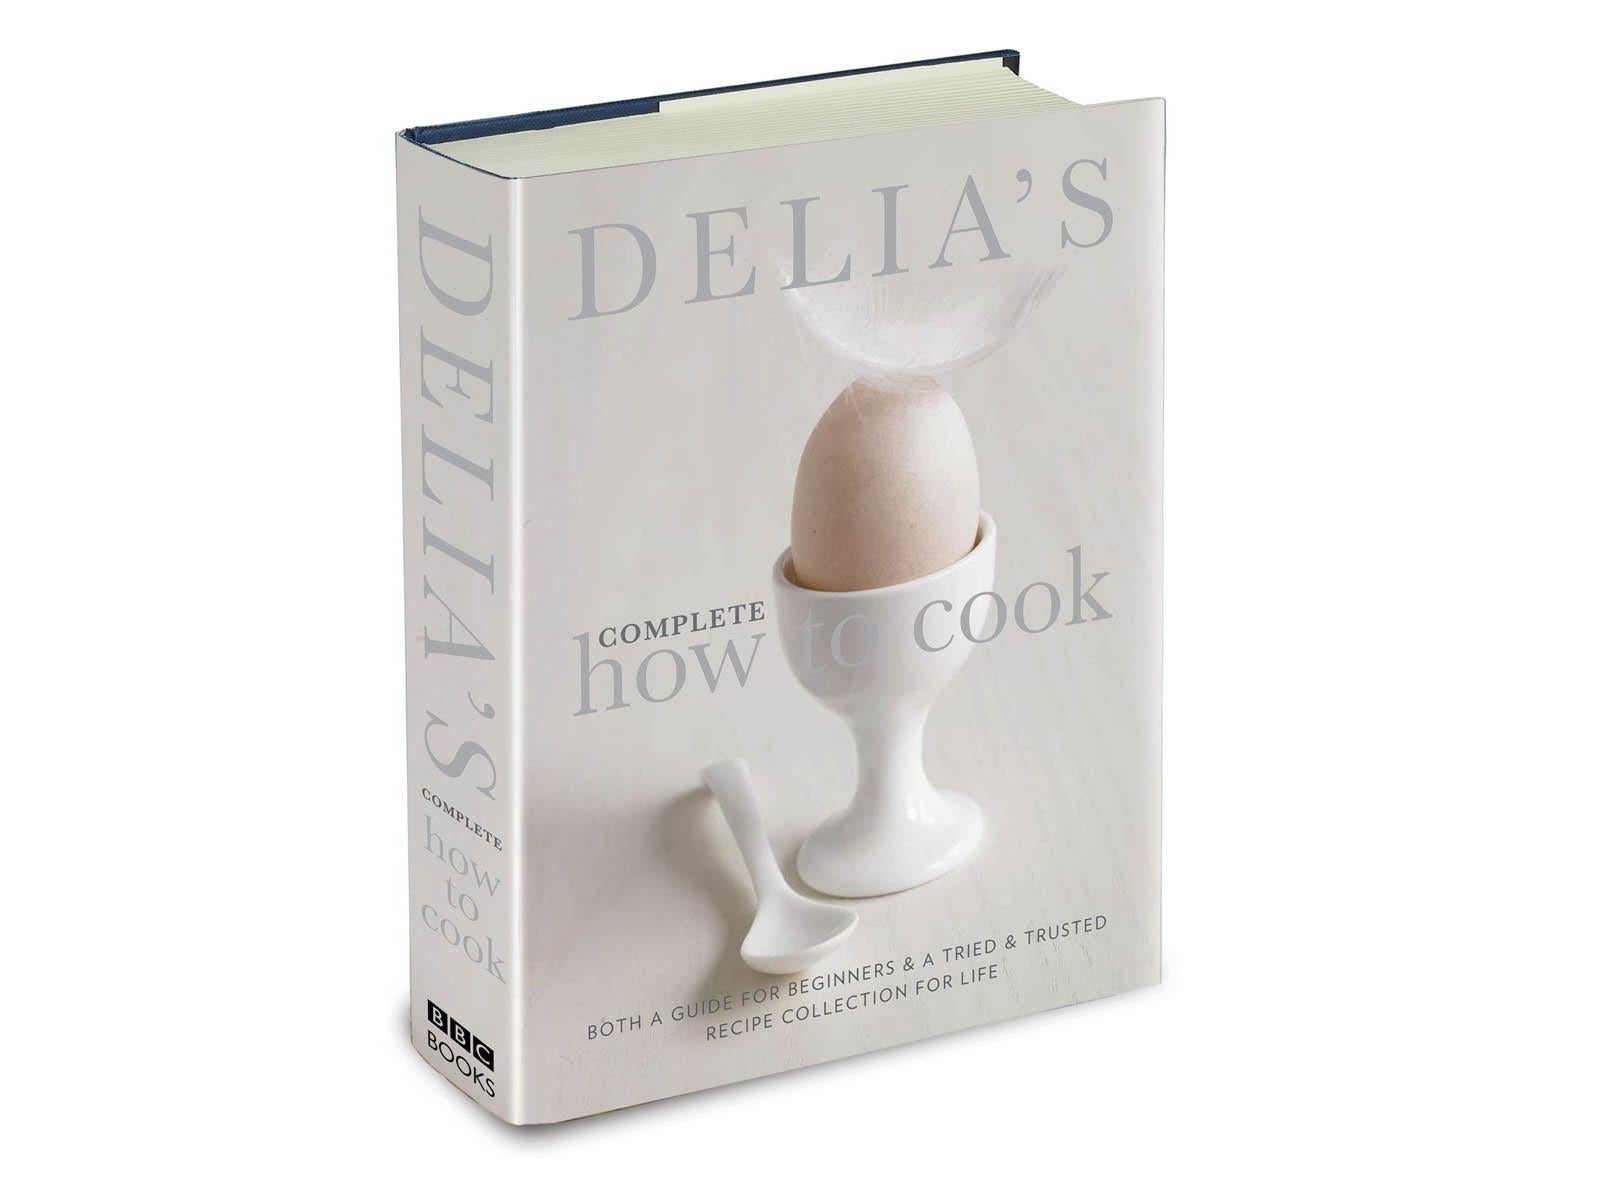 delias-complete-how-to-cook.jpg